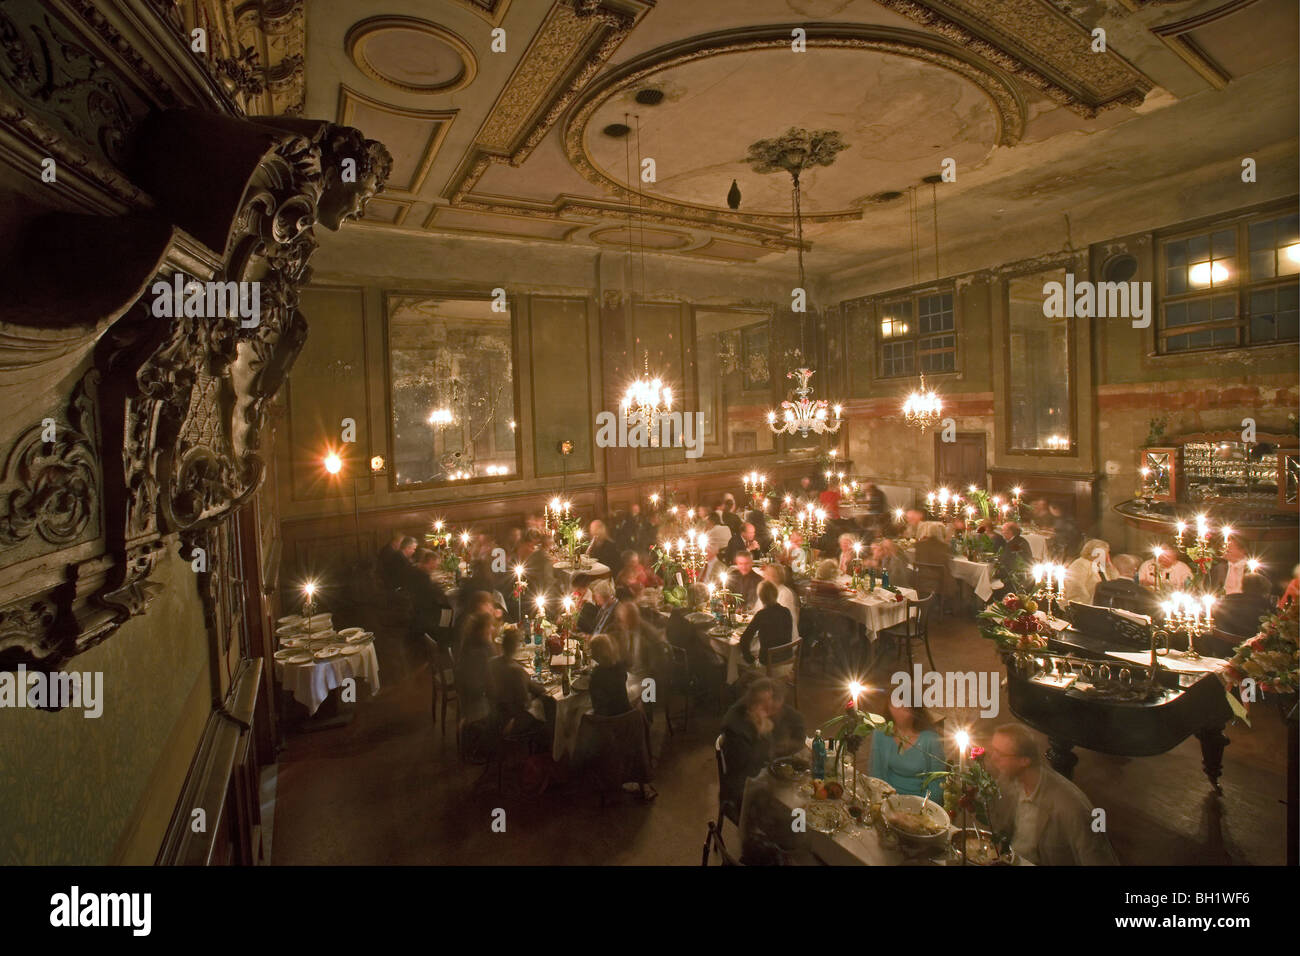 Claerchens Ballhaus, Berlin Mitte, private candlelight party with opera singers in costume, Berlin, Germany Stock Photo